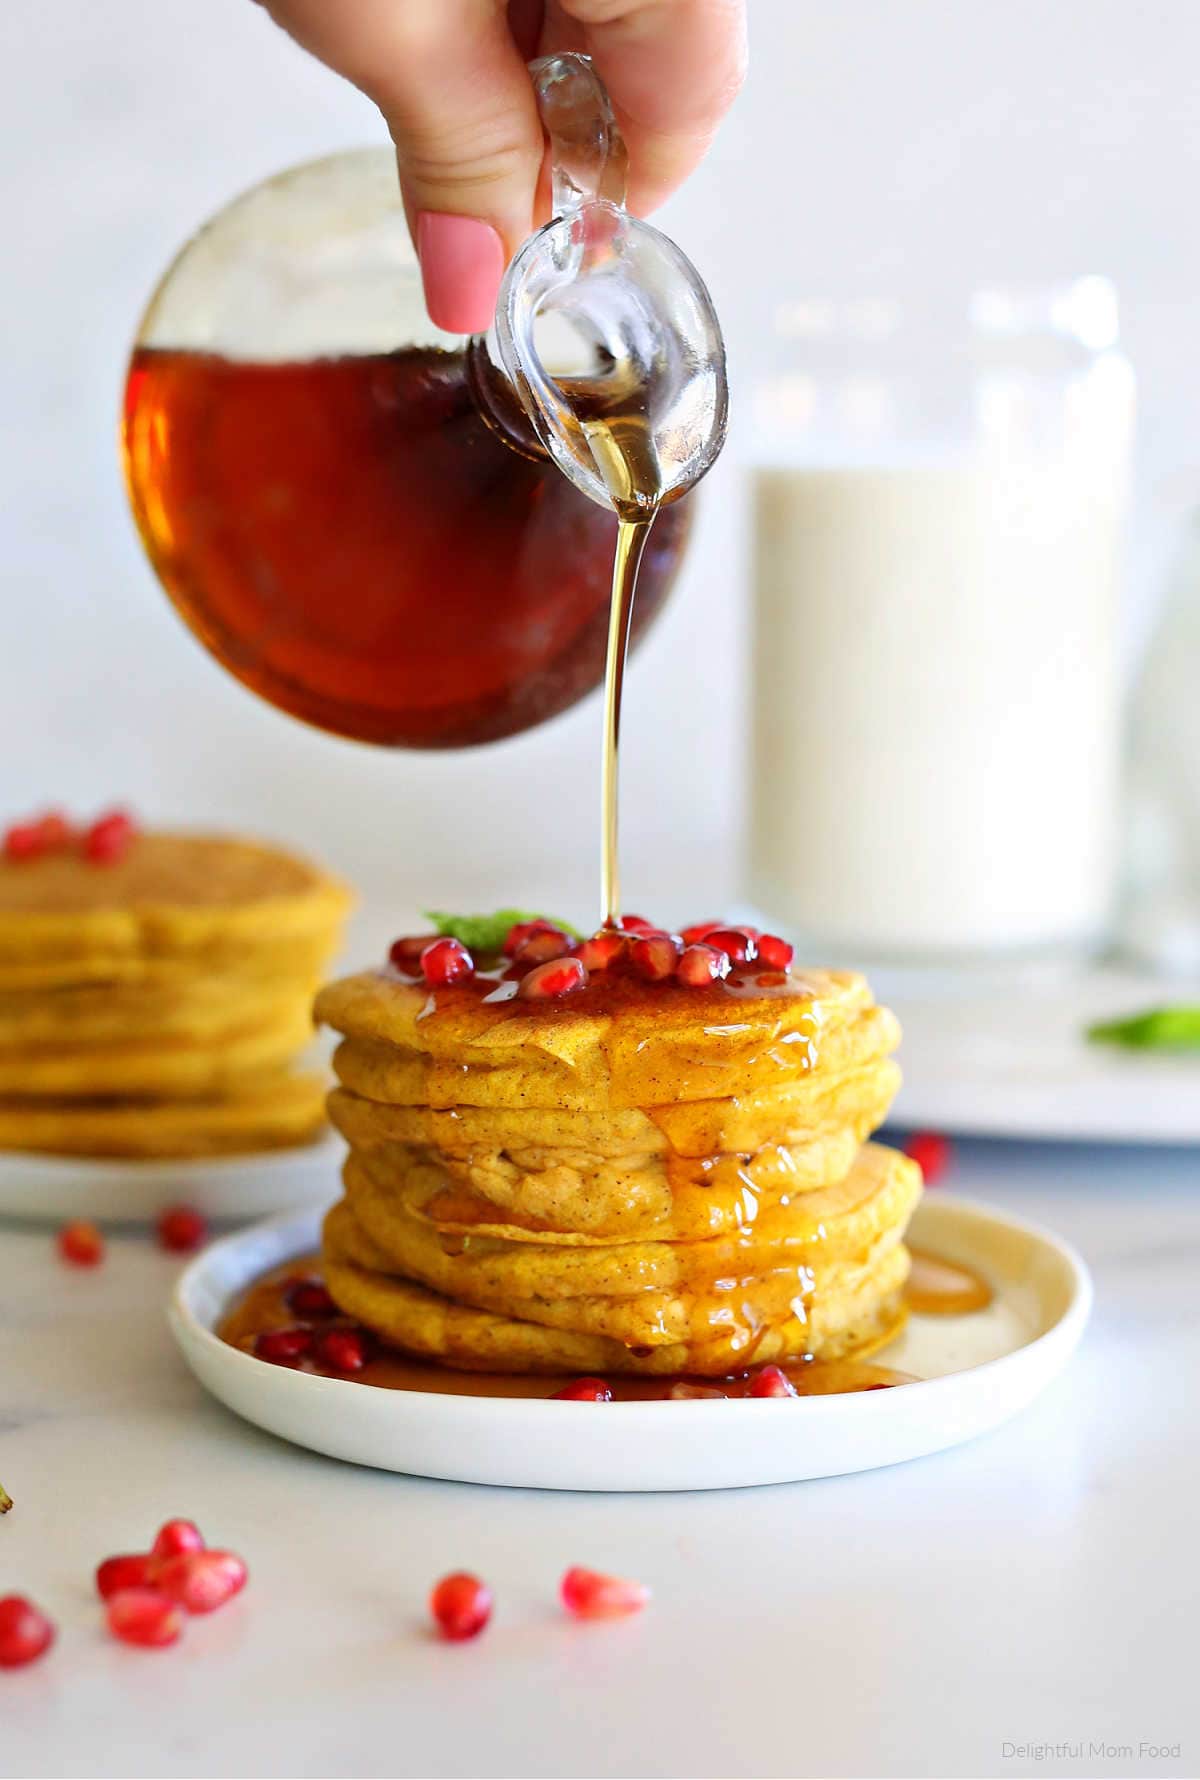 Healthy gluten free pumpkin pancake recipe with maple syrup being poured on top.